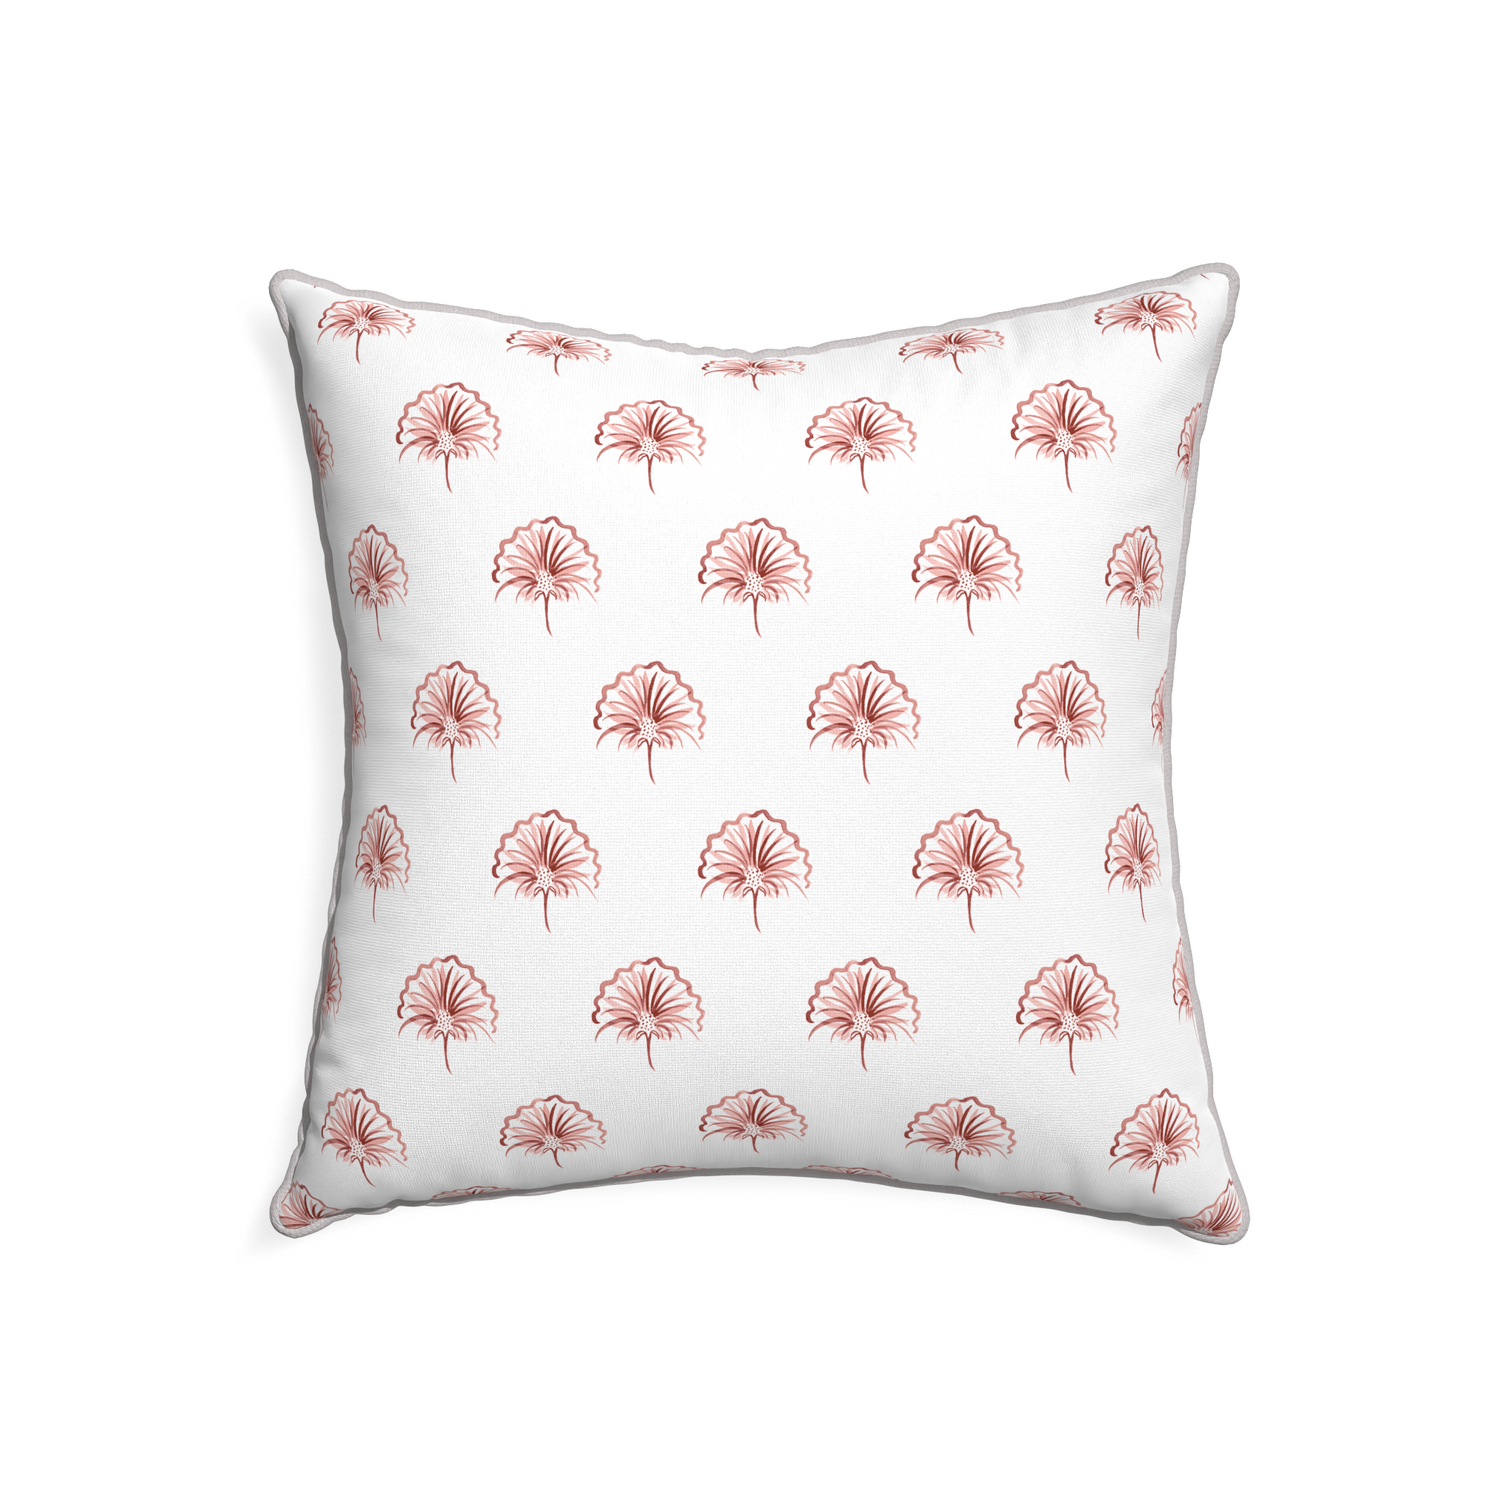 22-square penelope rose custom pillow with pebble piping on white background